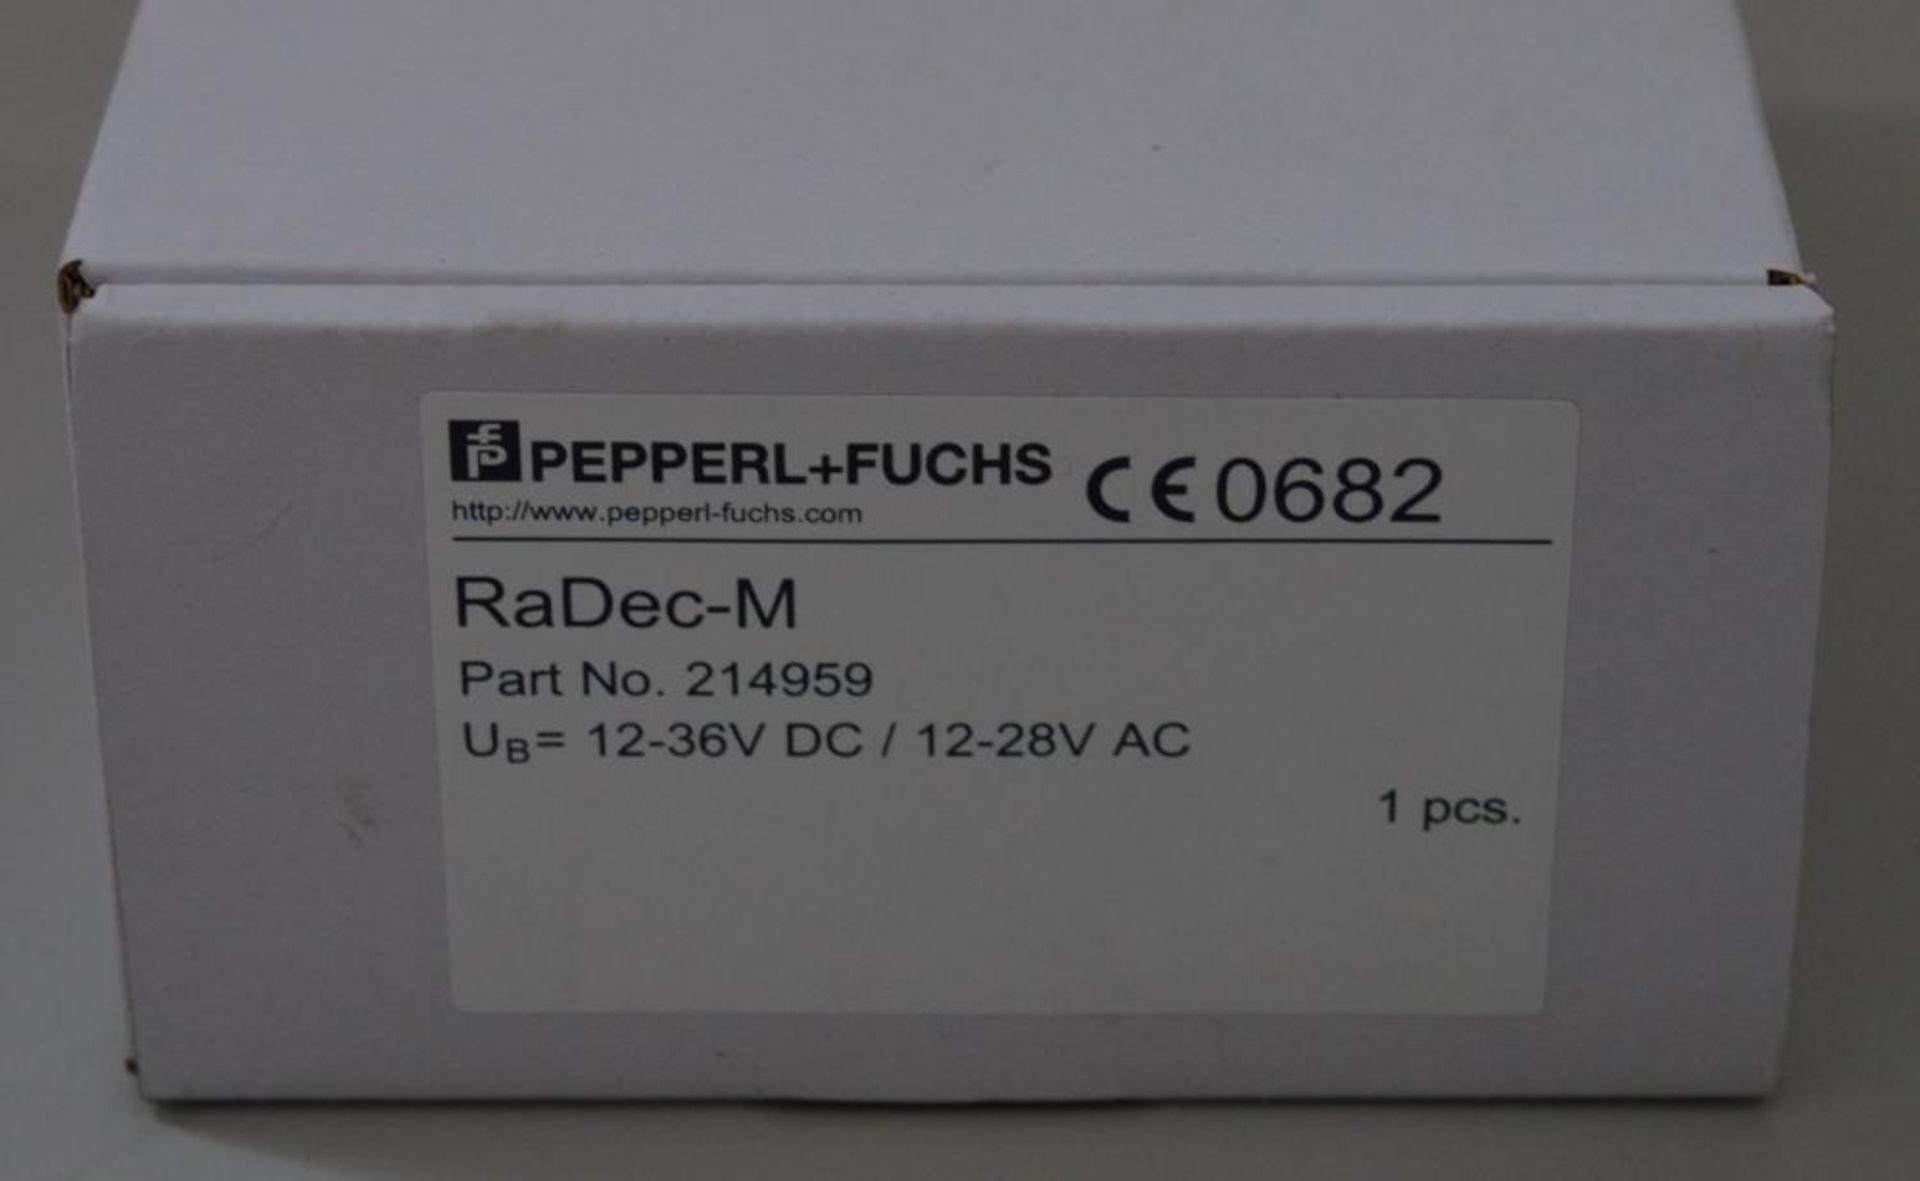 1 x Pepperl & Fuchs RaDec-M Radar Motion Detector - Suitable For Automatic Doors - 24Ghz - Image 3 of 5